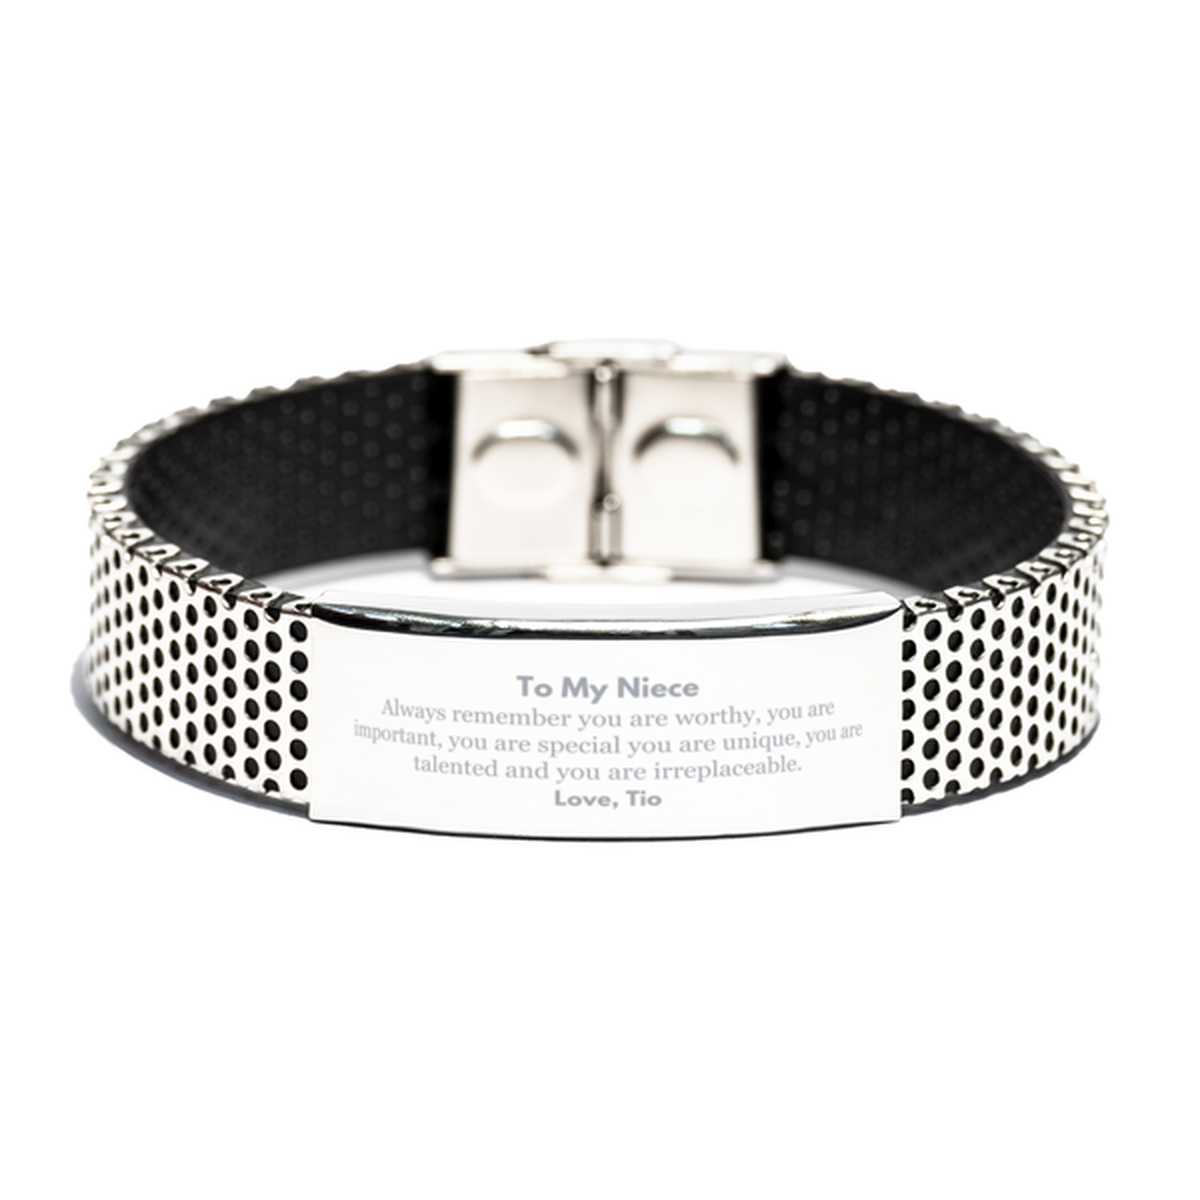 Niece Birthday Gifts from Tio, Inspirational Stainless Steel Bracelet for Niece Christmas Graduation Gifts for Niece Always remember you are worthy, you are important. Love, Tio